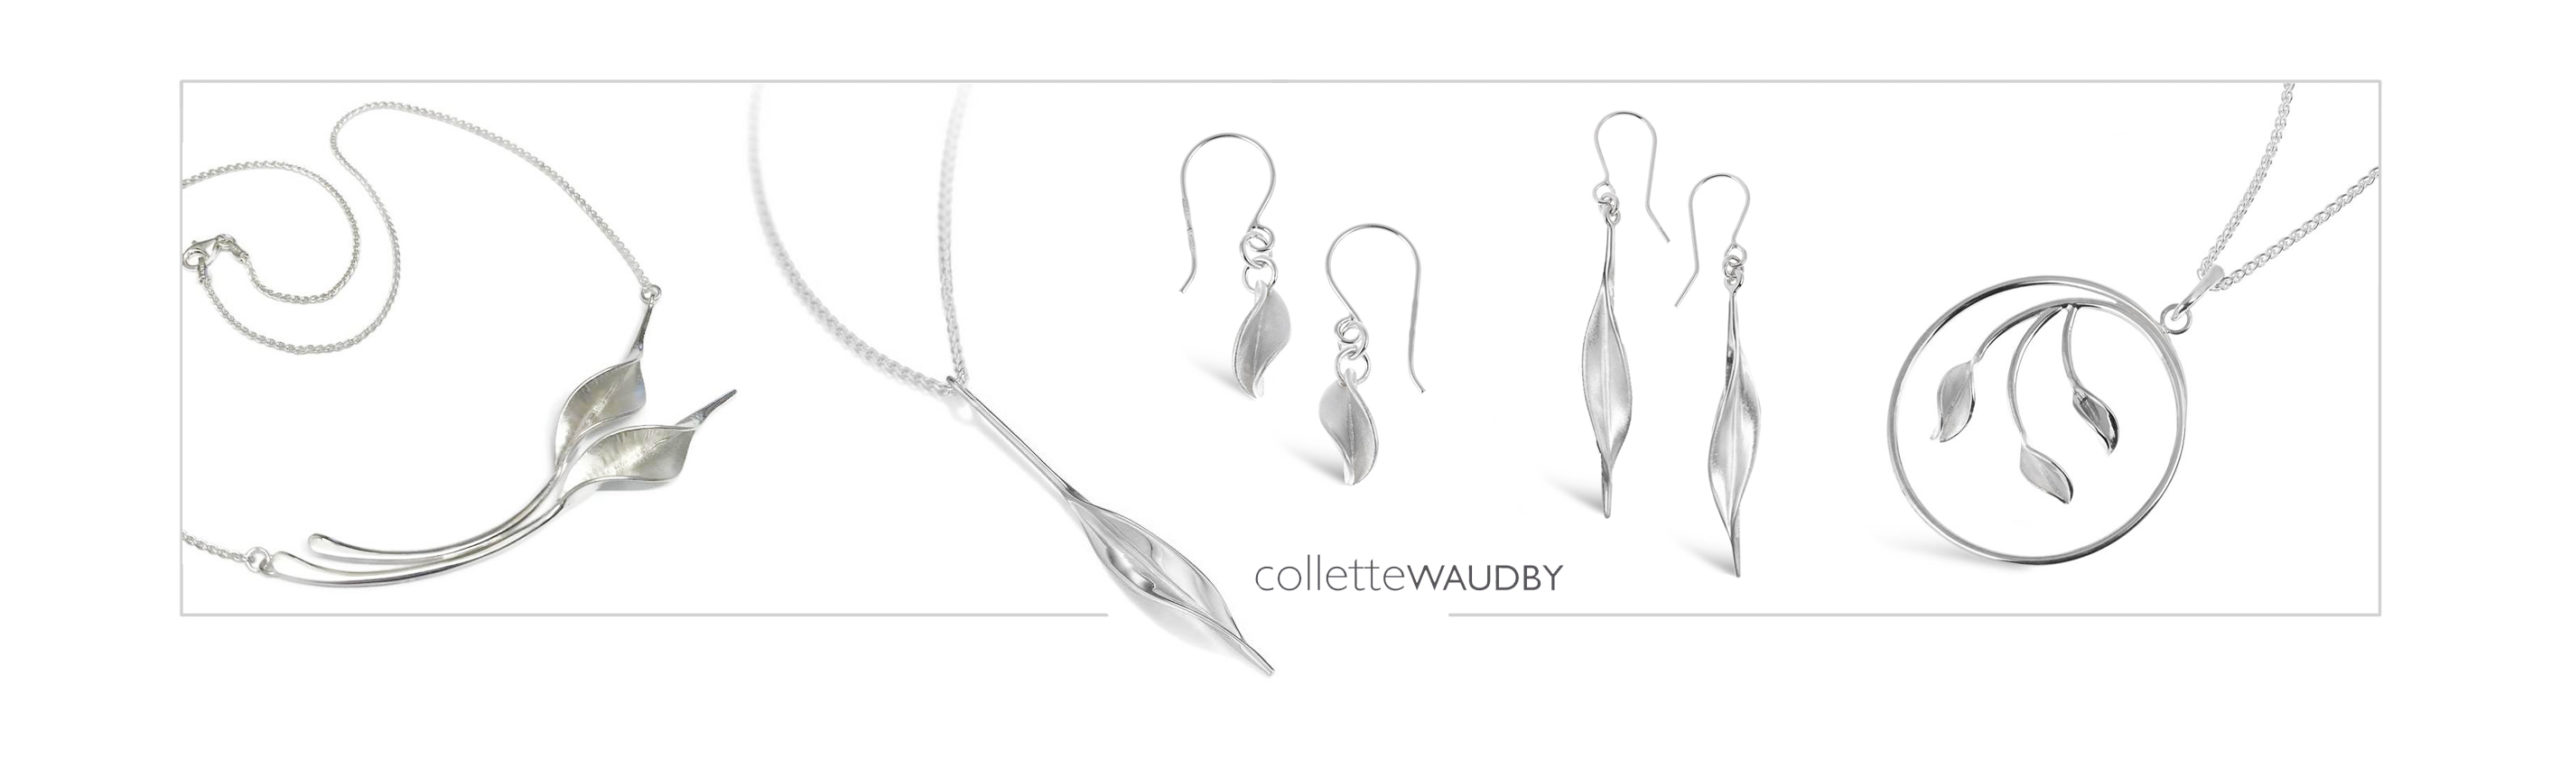 Collette Waudby Jewellery available at Louise Shafar